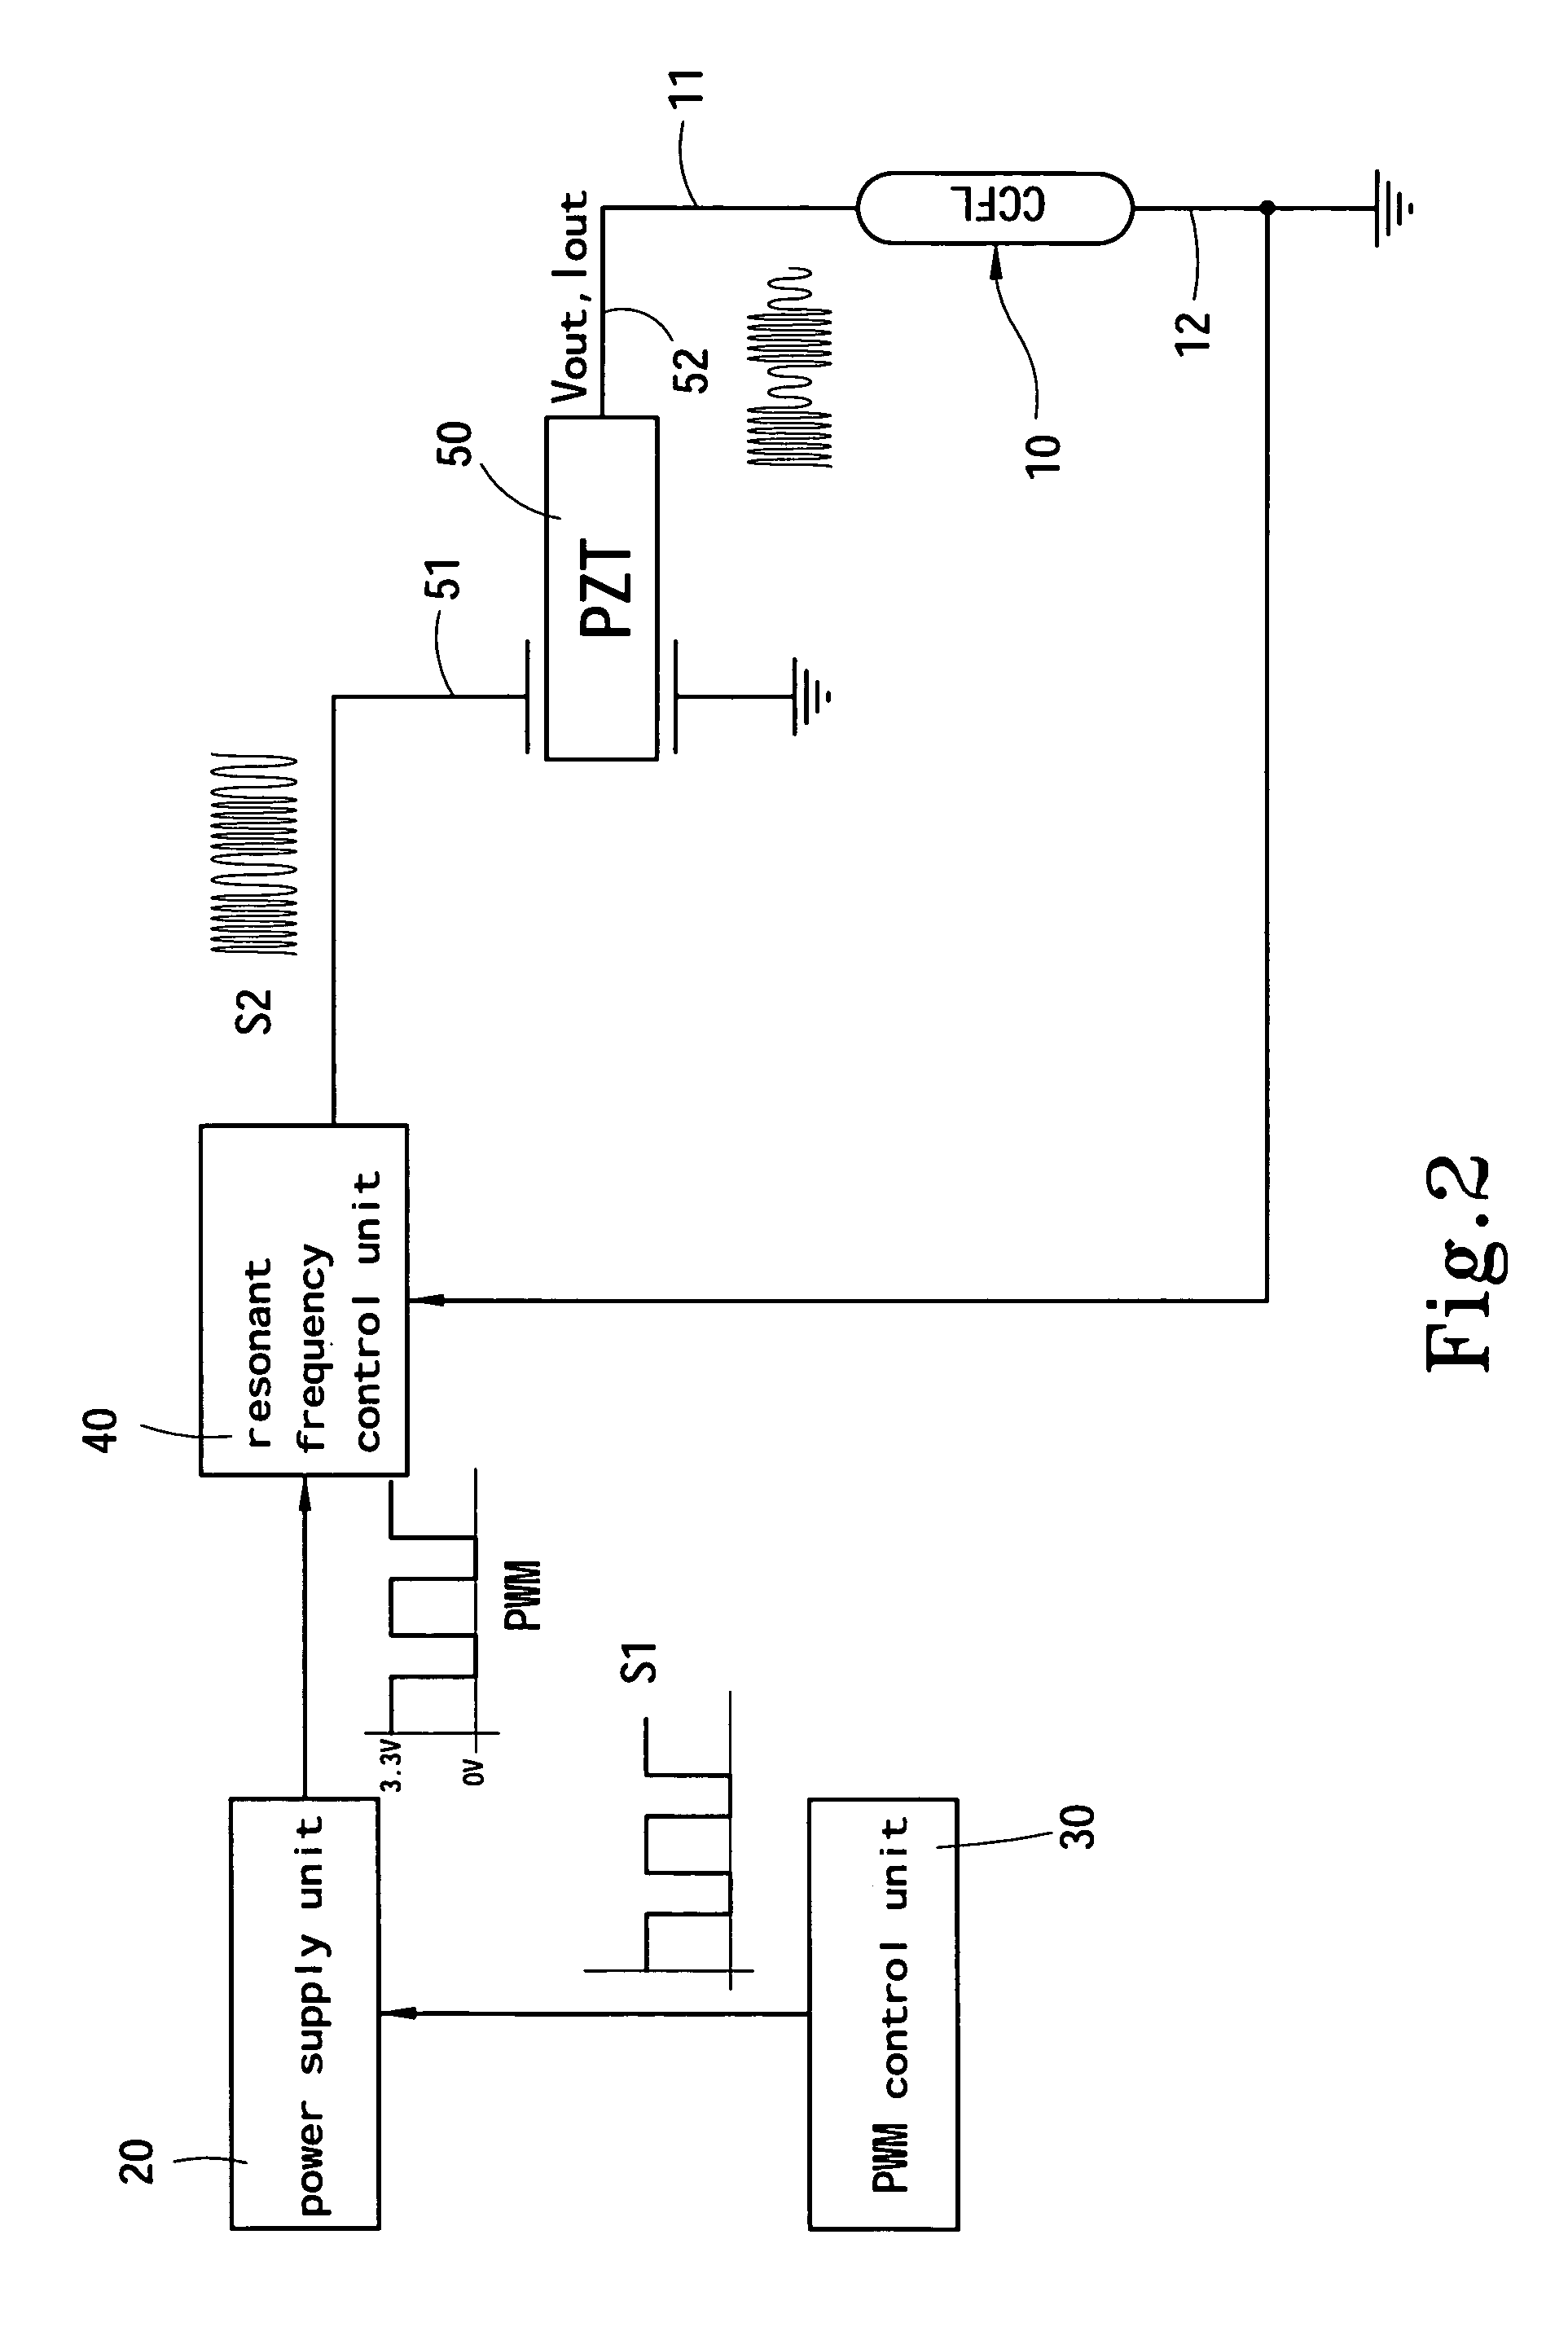 Light modulation method and apparatus for cold cathode fluorescent lamps